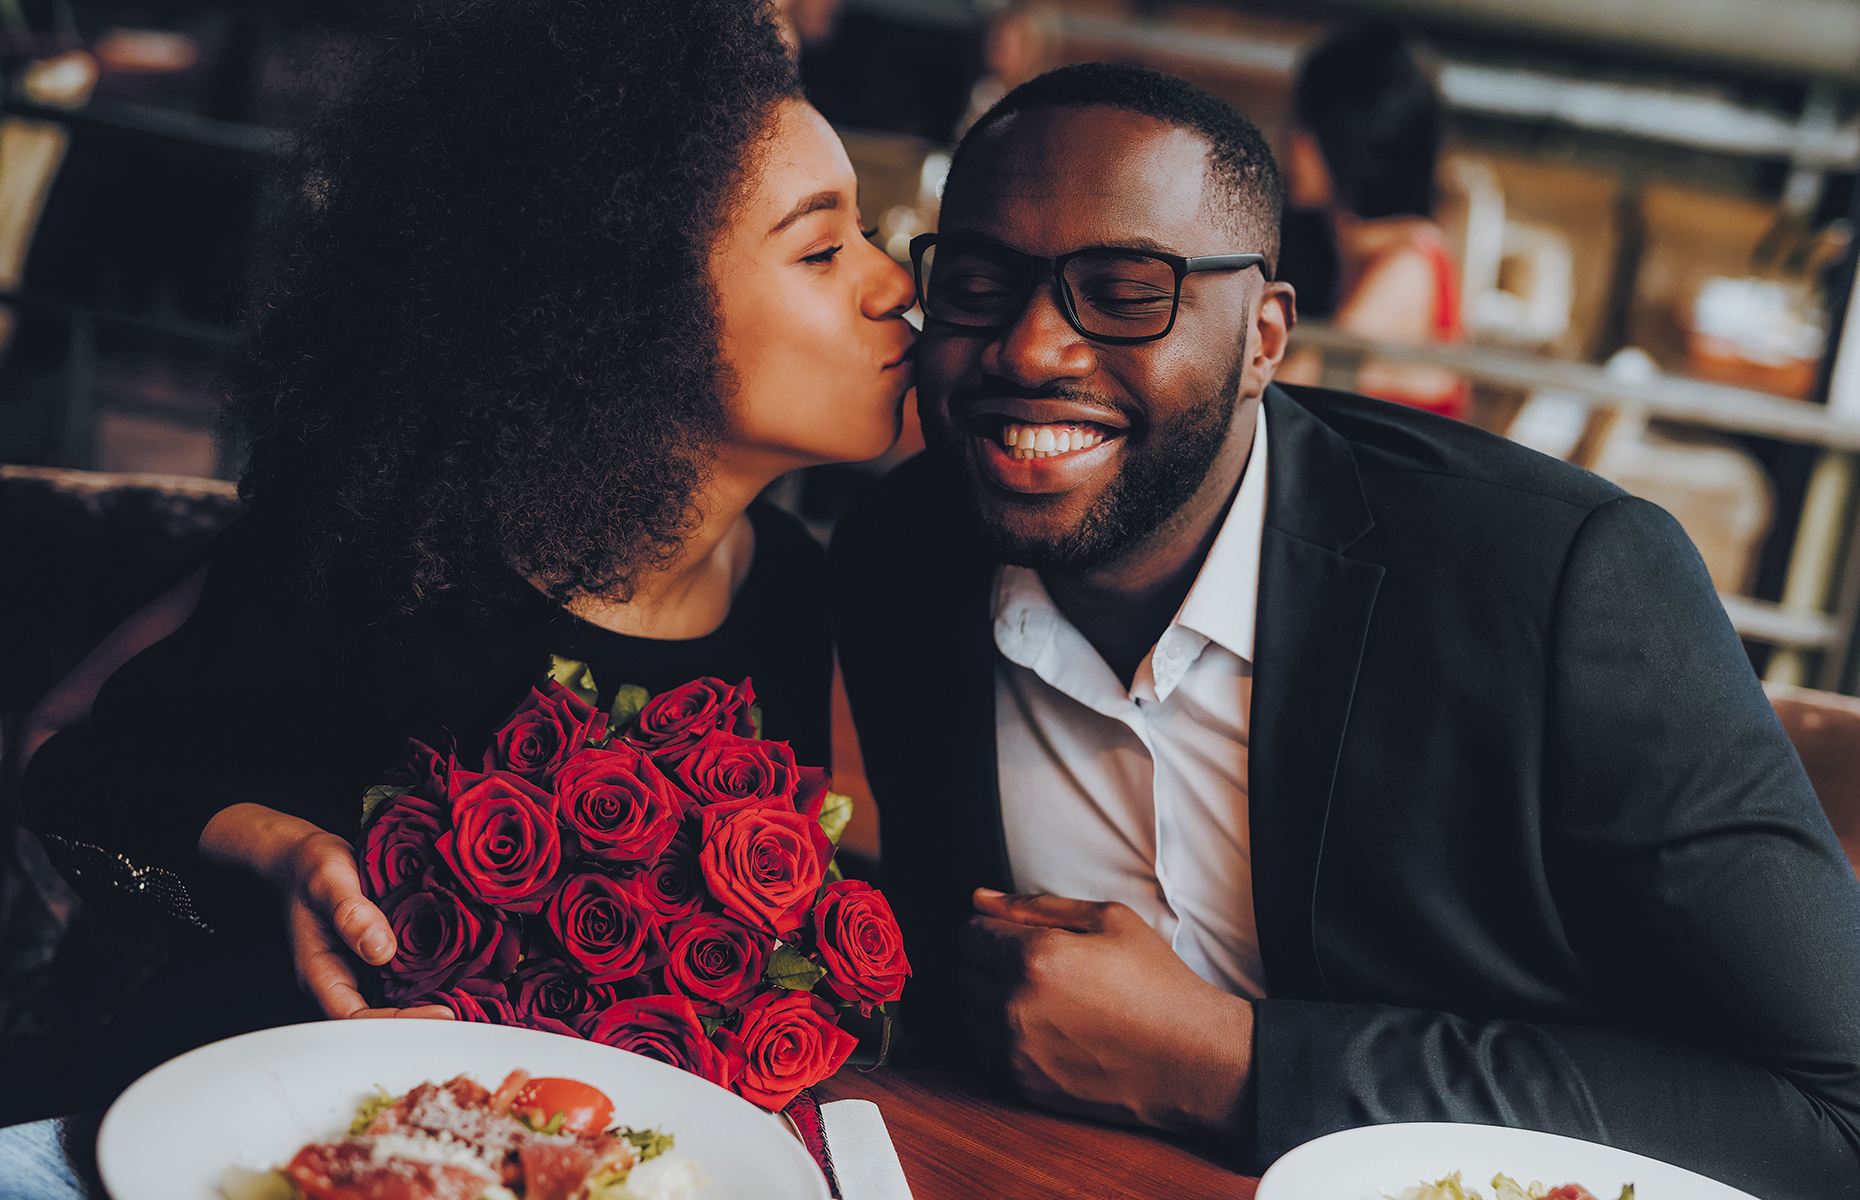 <p><a href="https://www.parents.com/news/most-parents-havent-been-on-a-romantic-date-in-way-too-long/"><em>Parents</em></a> reported that most parents haven’t been on a romantic date in more than three years. The survey of more than 2,000 parents of school-aged children found 30% of the respondents said it’d been so long they didn’t even remember when the last one was. As DINKs, you and your partner don’t have parental responsibilities like changing diapers or driving kids to extracurricular activities, giving you more time to bond as a couple, whether that’s going out for dinner or snuggling at home.</p>